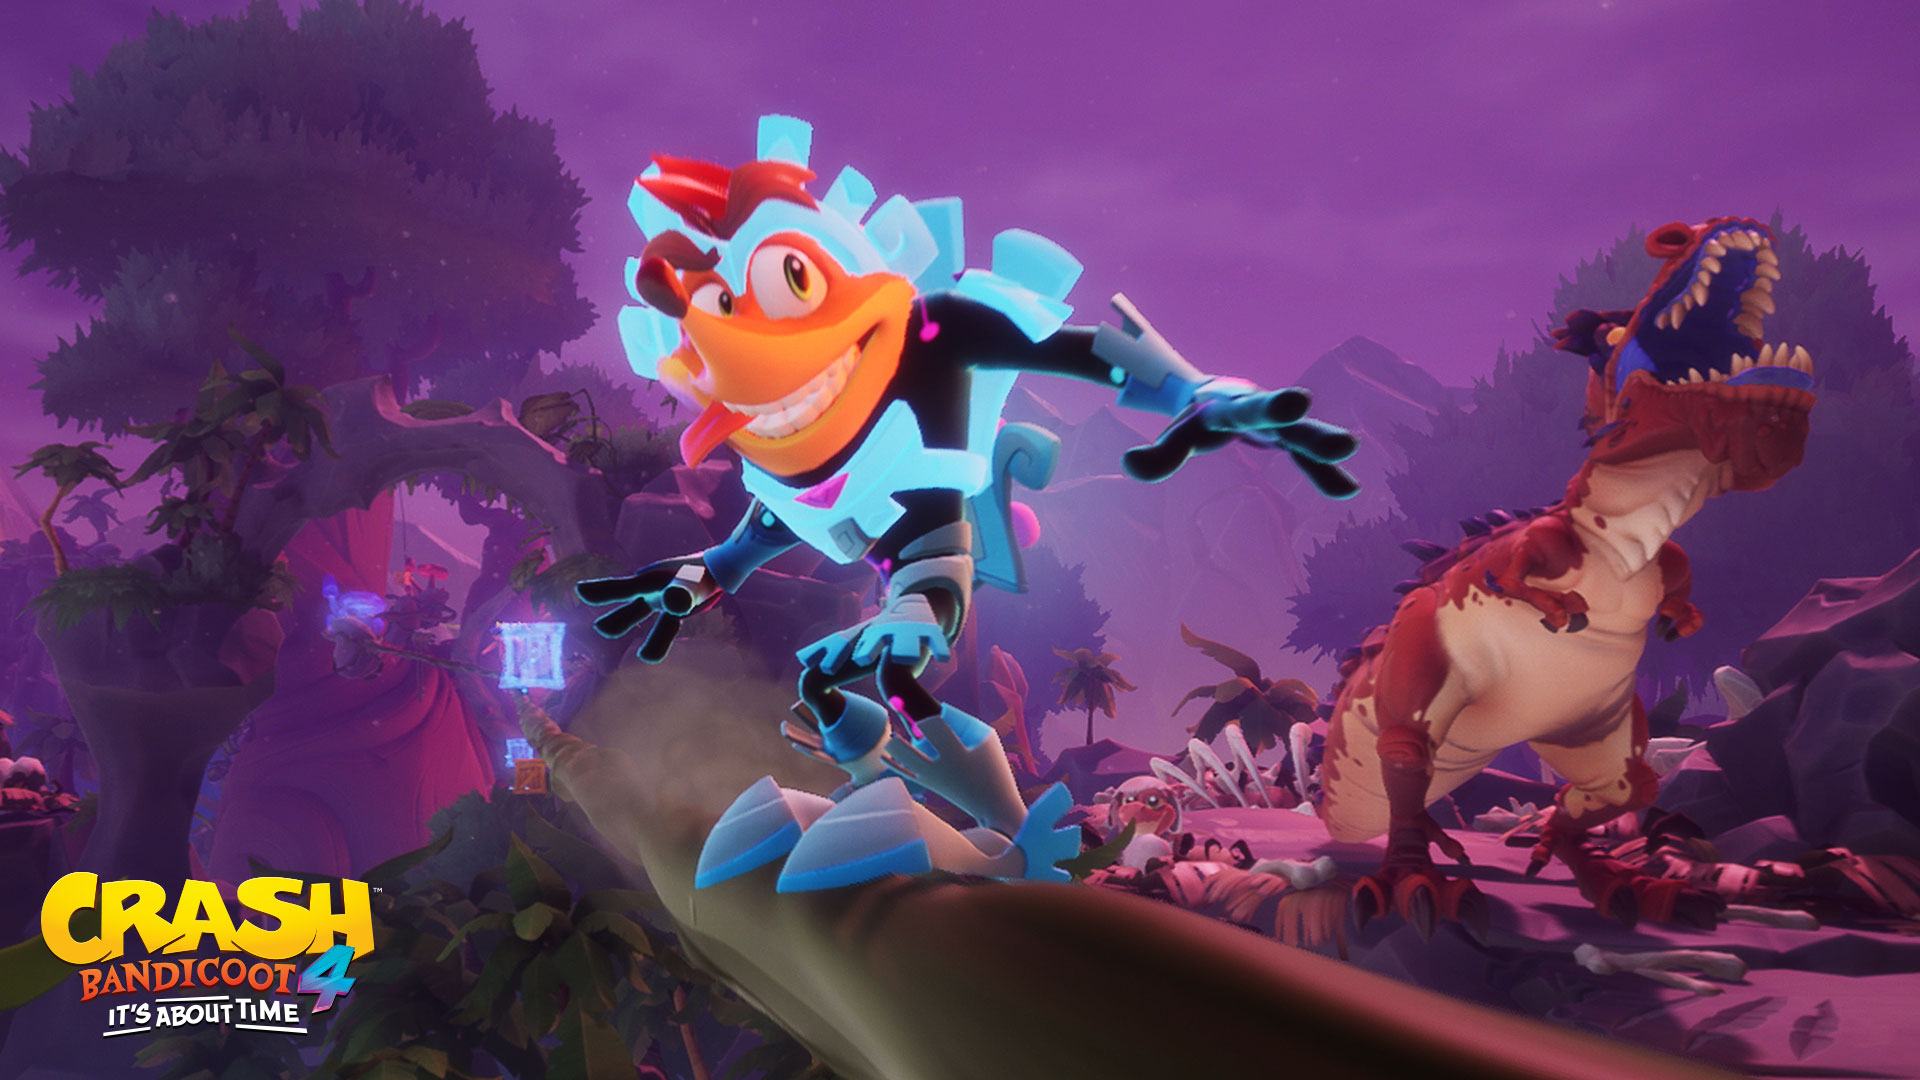 Crash Bandicoot™ 4: It's About Time – Available now on Battle.net